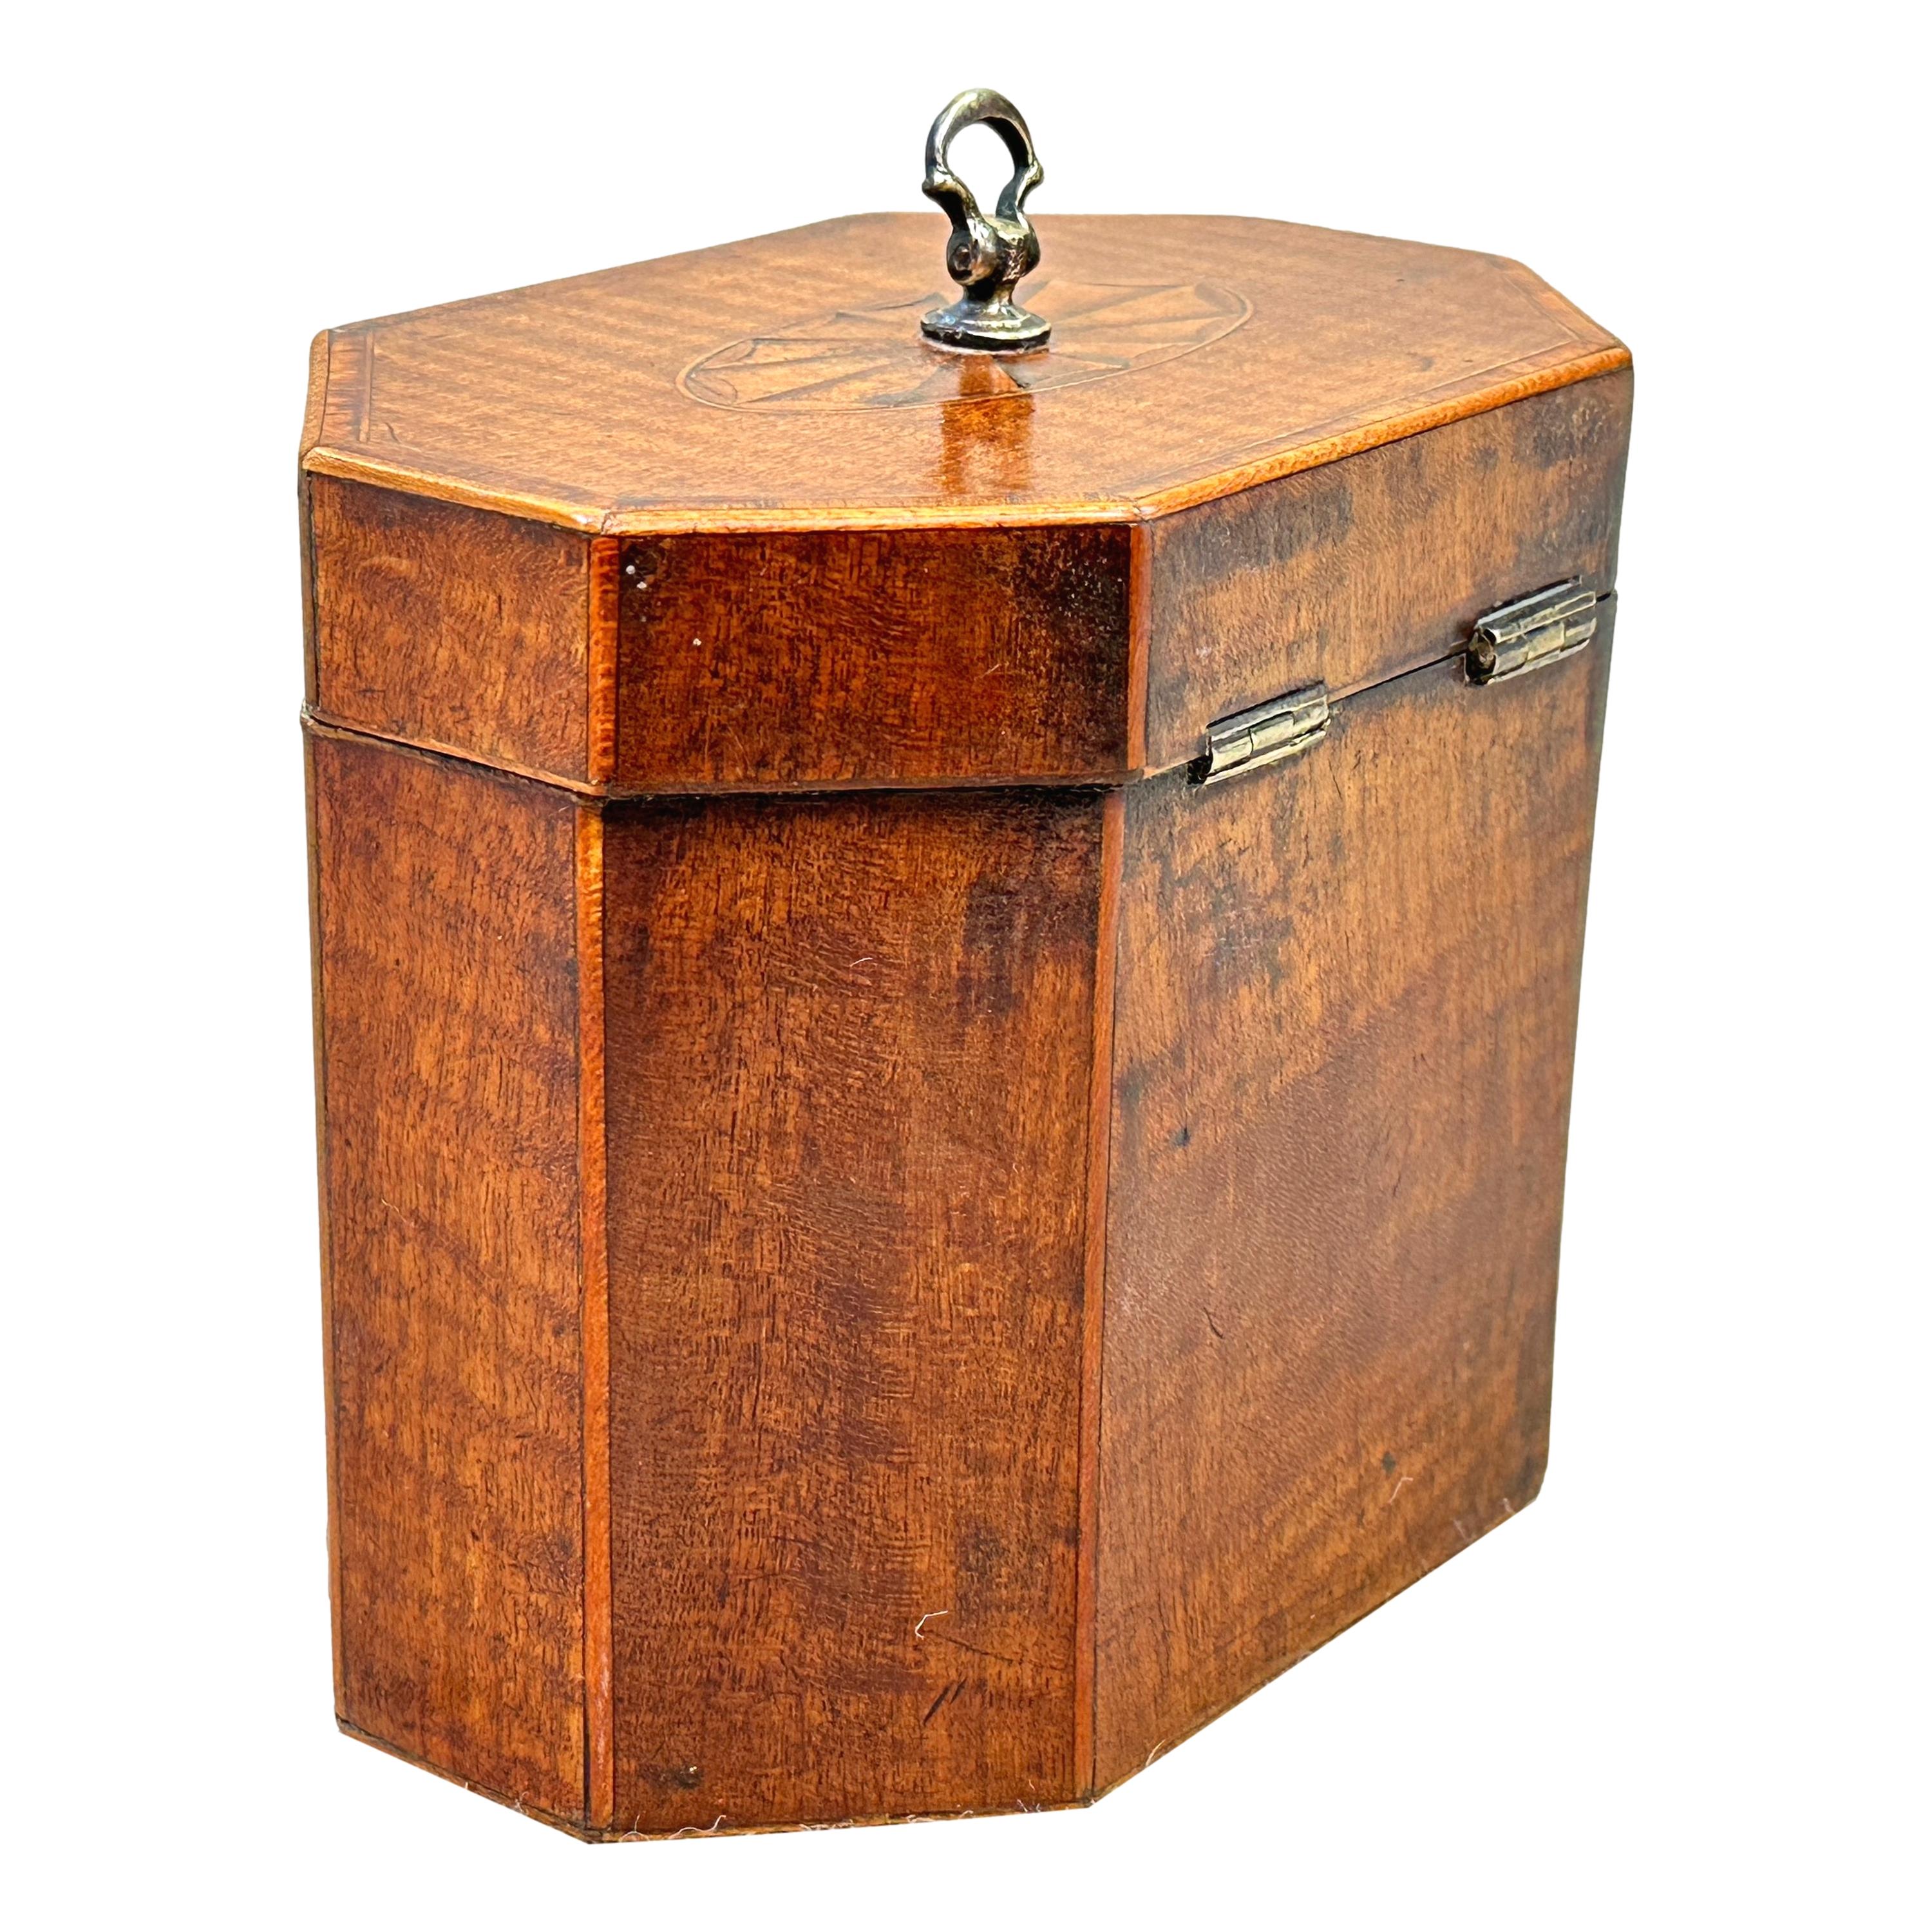 Georgian 18th Century Octagonal Mahogany Tea Caddy In Good Condition For Sale In Bedfordshire, GB